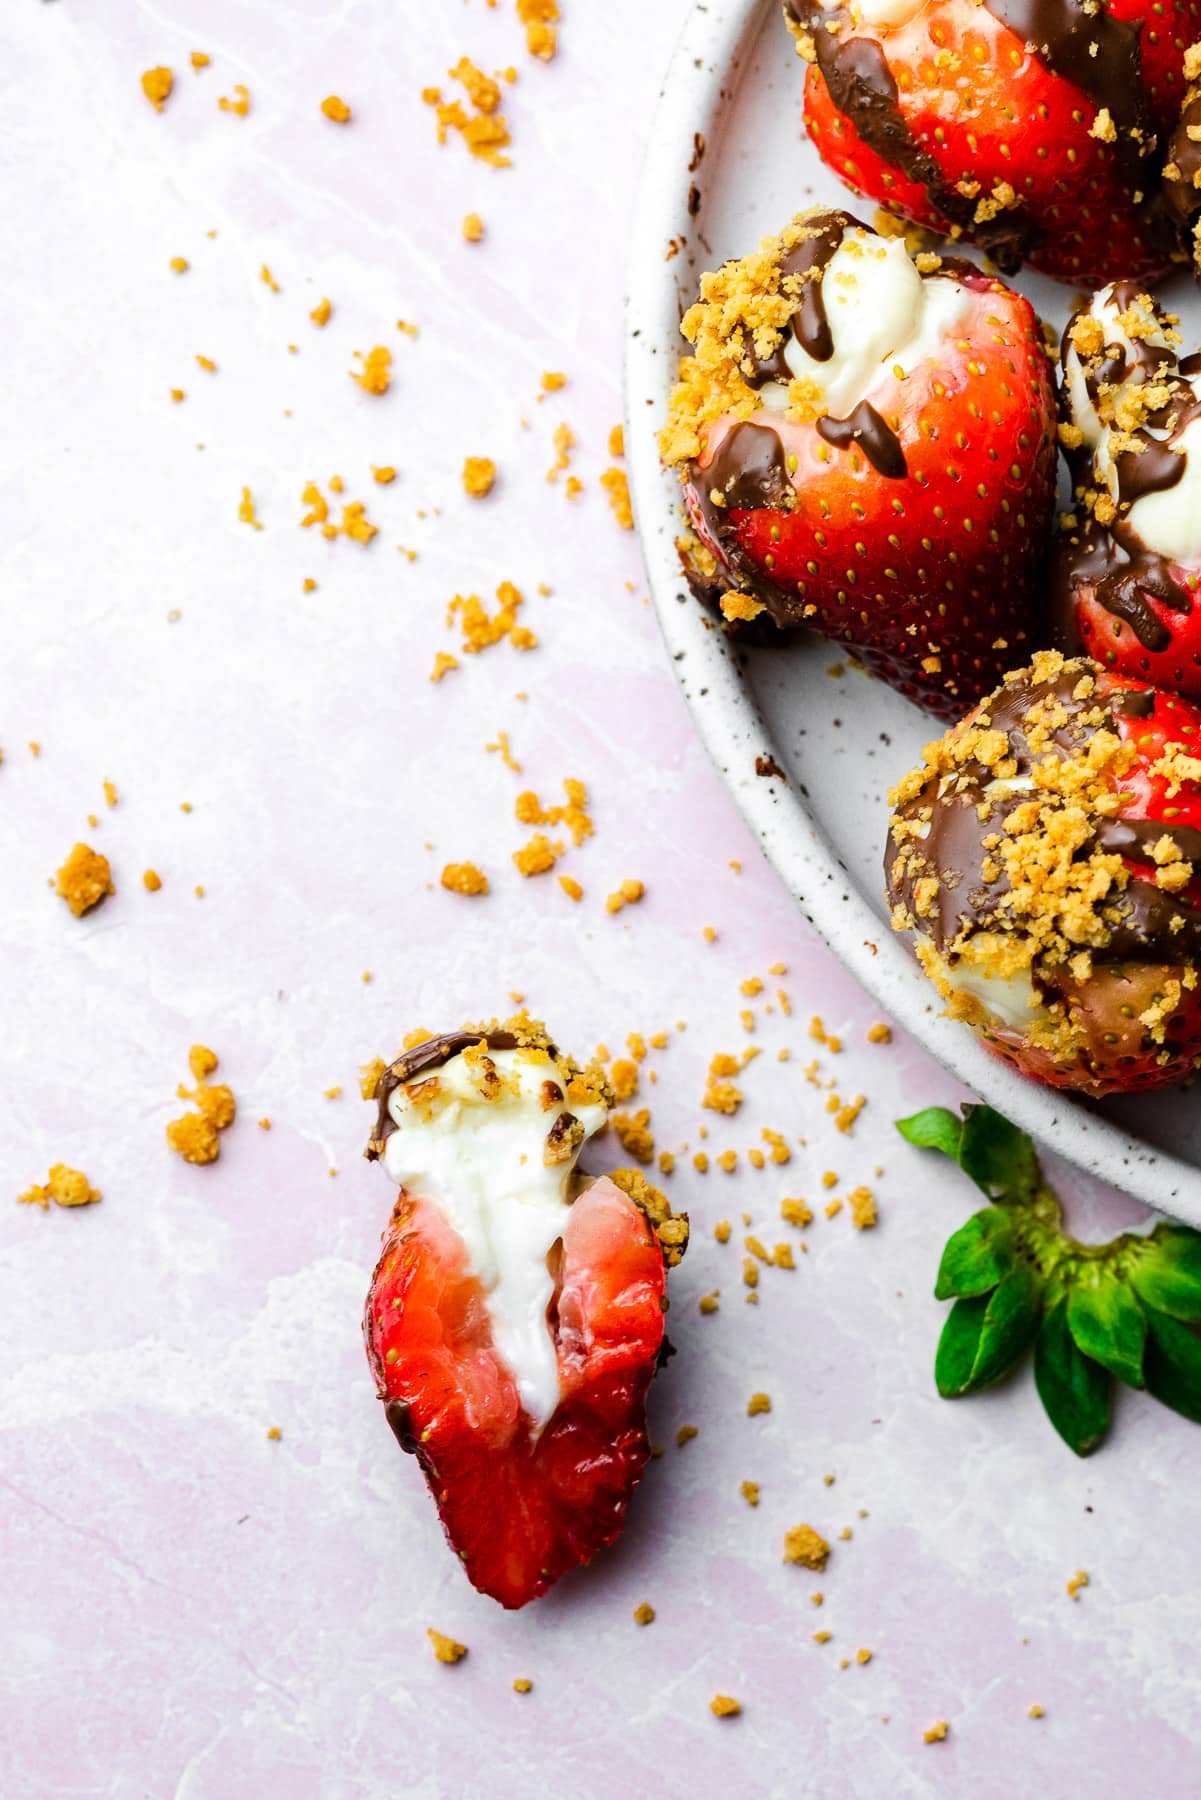 a single strawberry halved to show a cheesecake filling amongst crumbs and a plate of similar strawberries